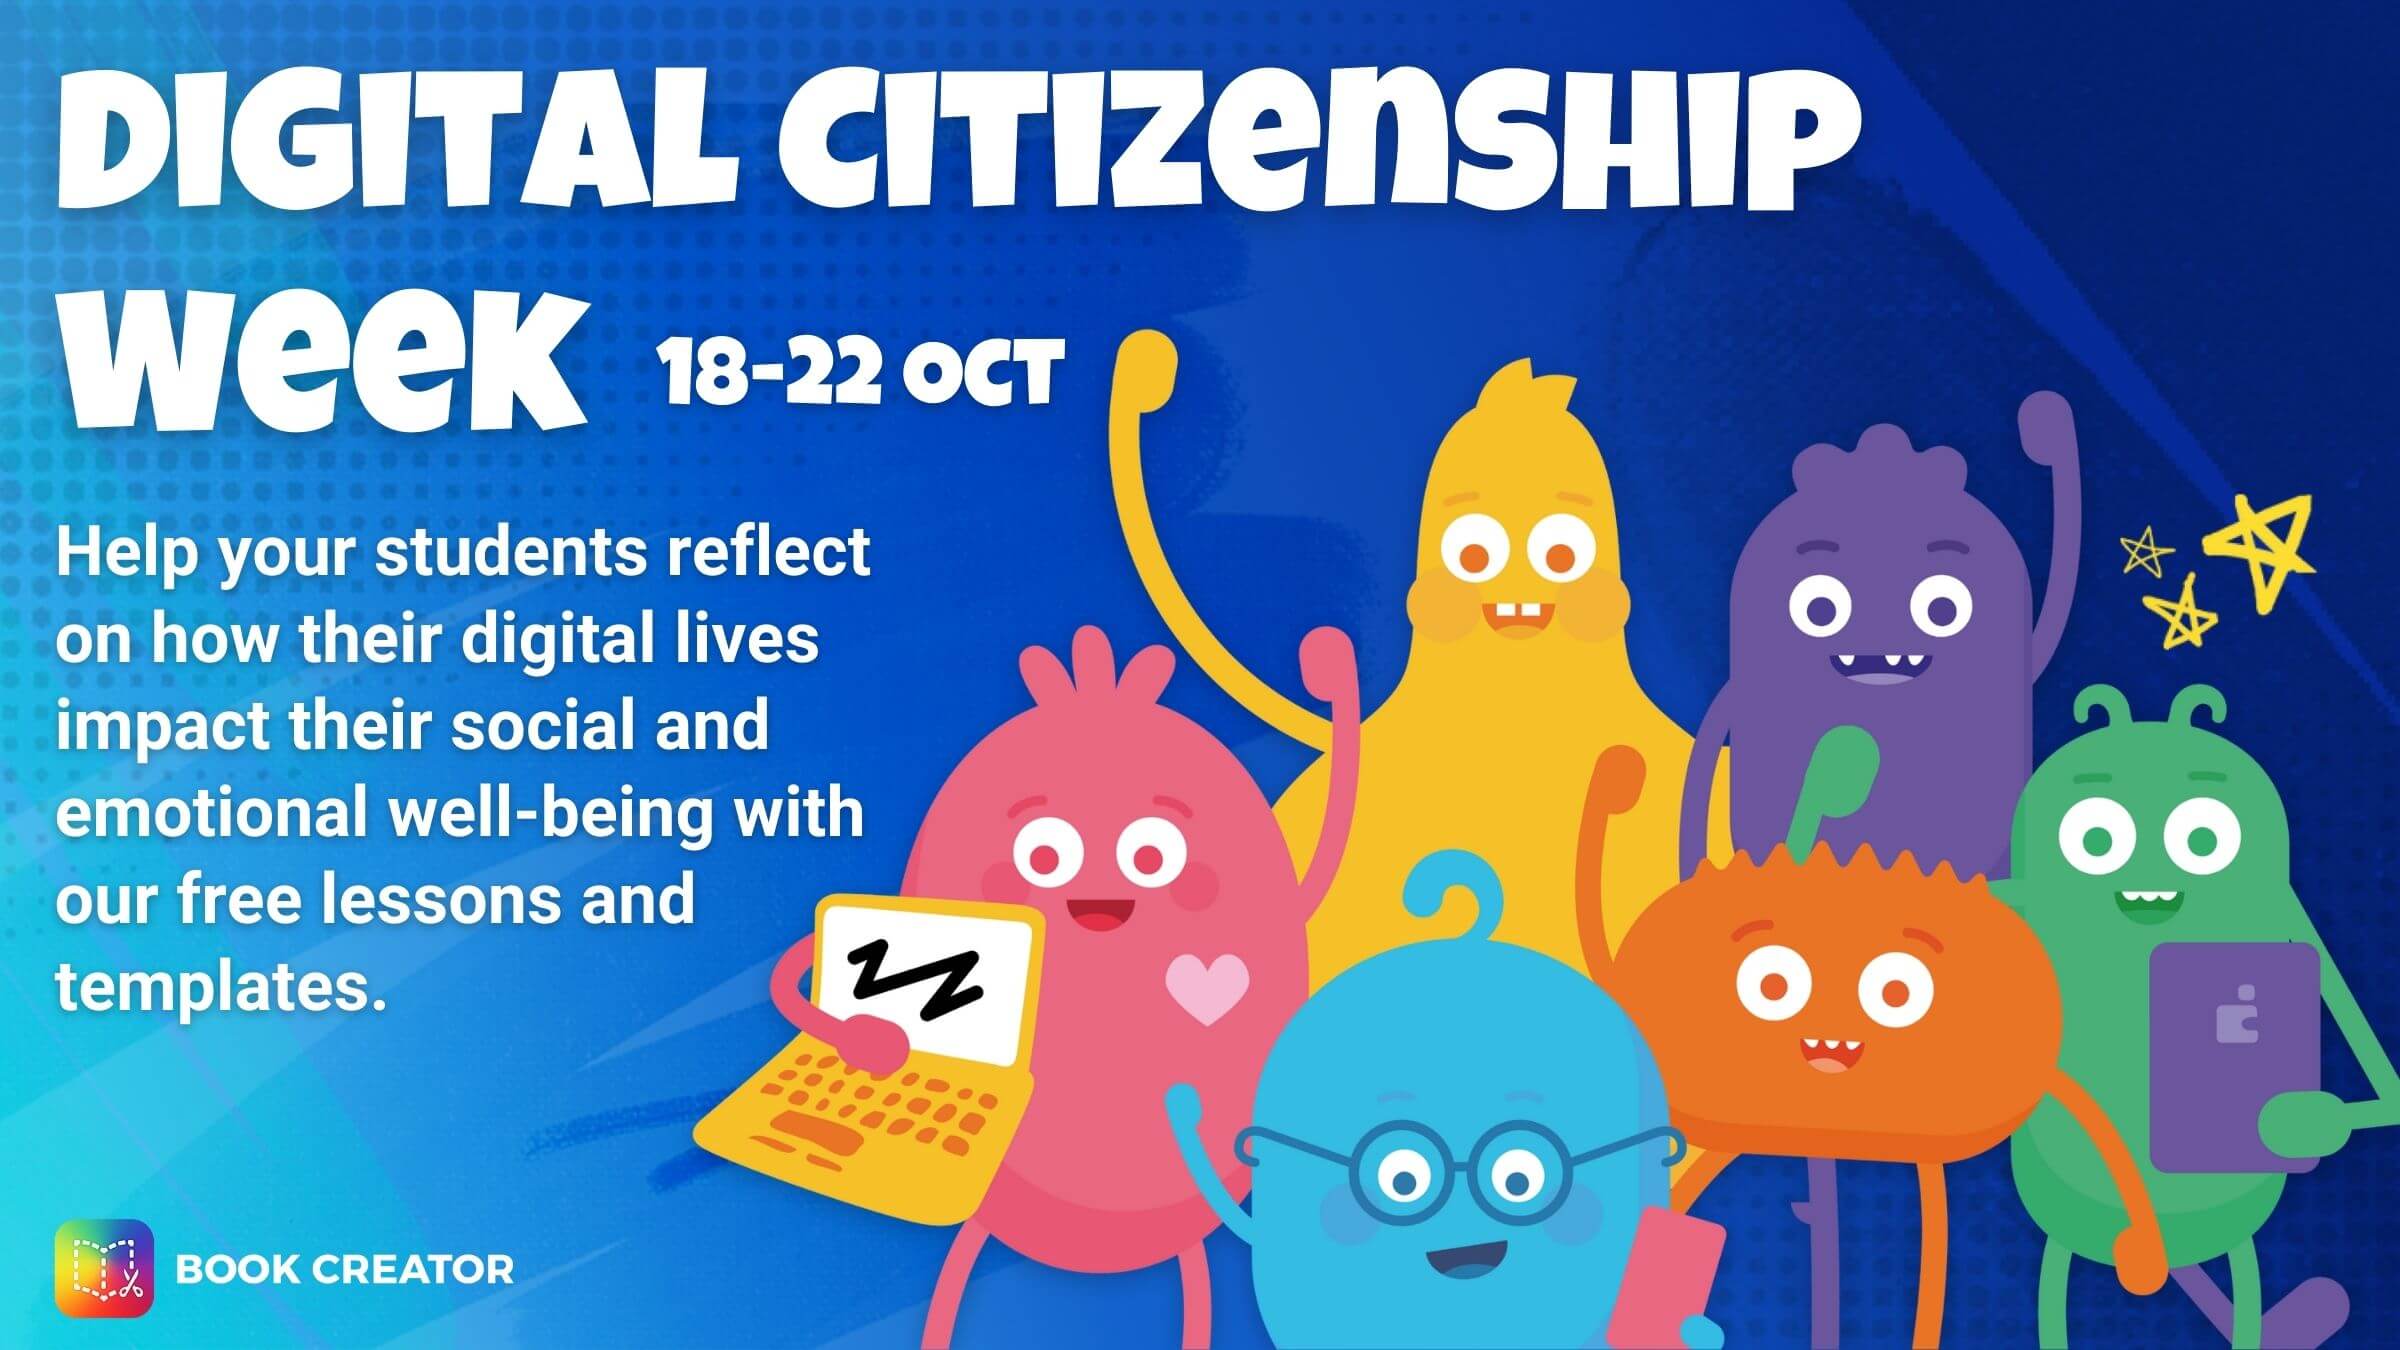 Featured image for “Digital Citizenship Week”